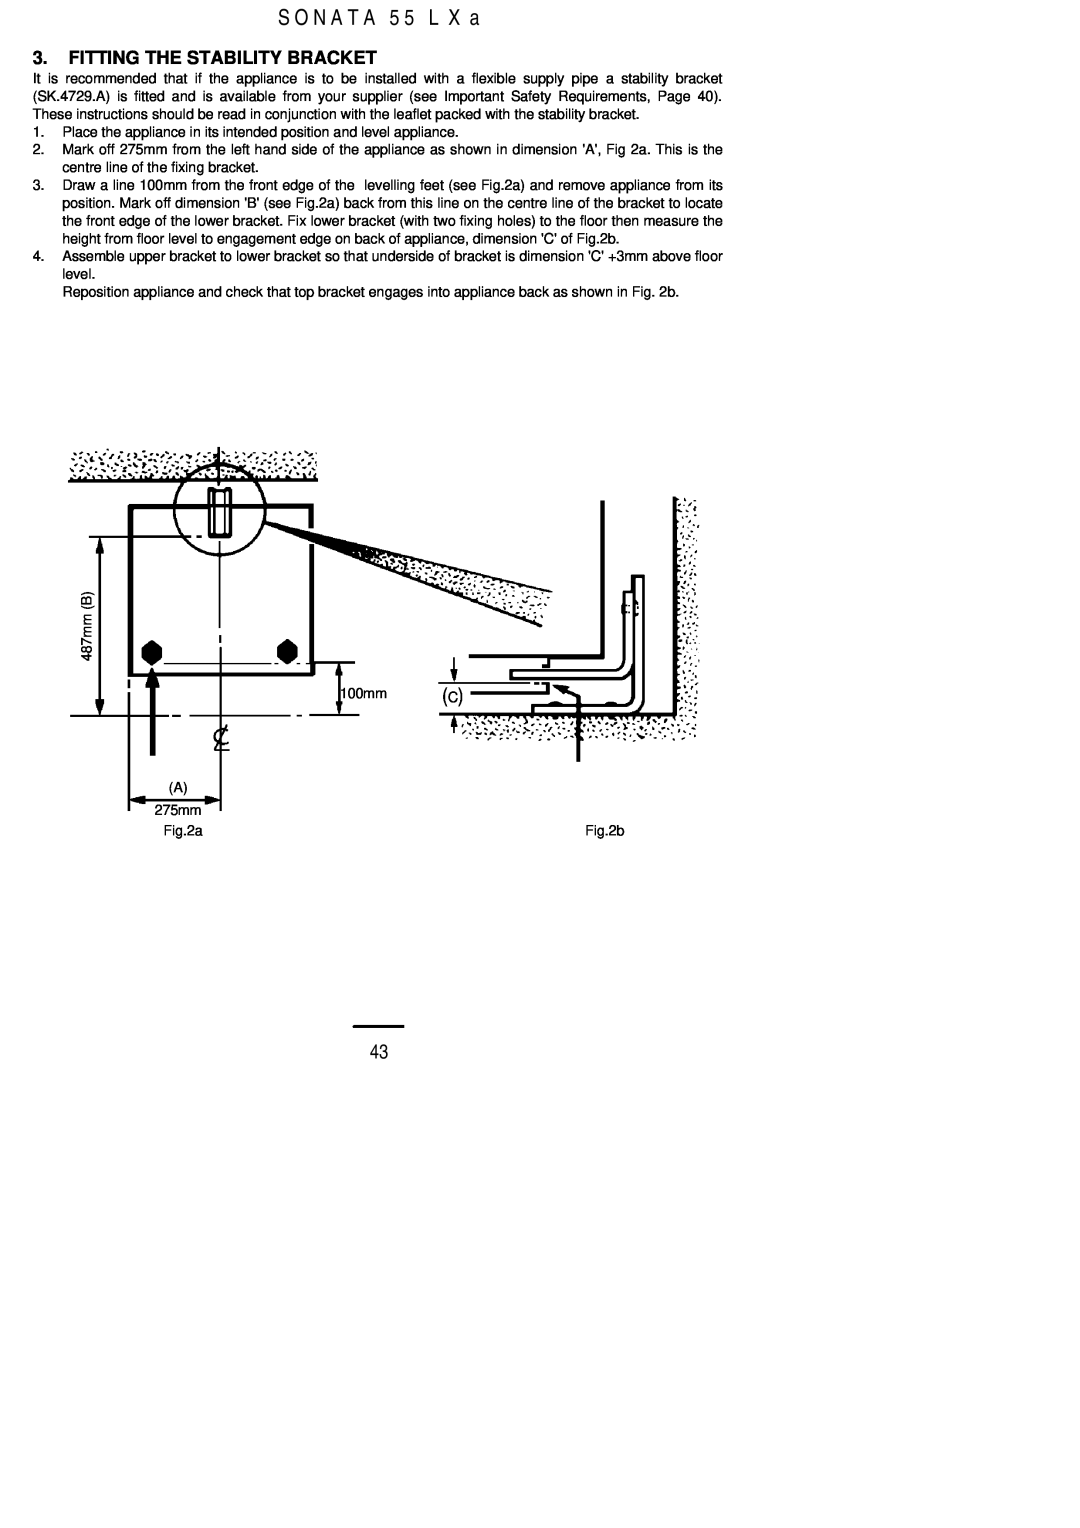 Electrolux 55LXa installation instructions S O N A T A 5 5 L X a, Fitting The Stability Bracket 